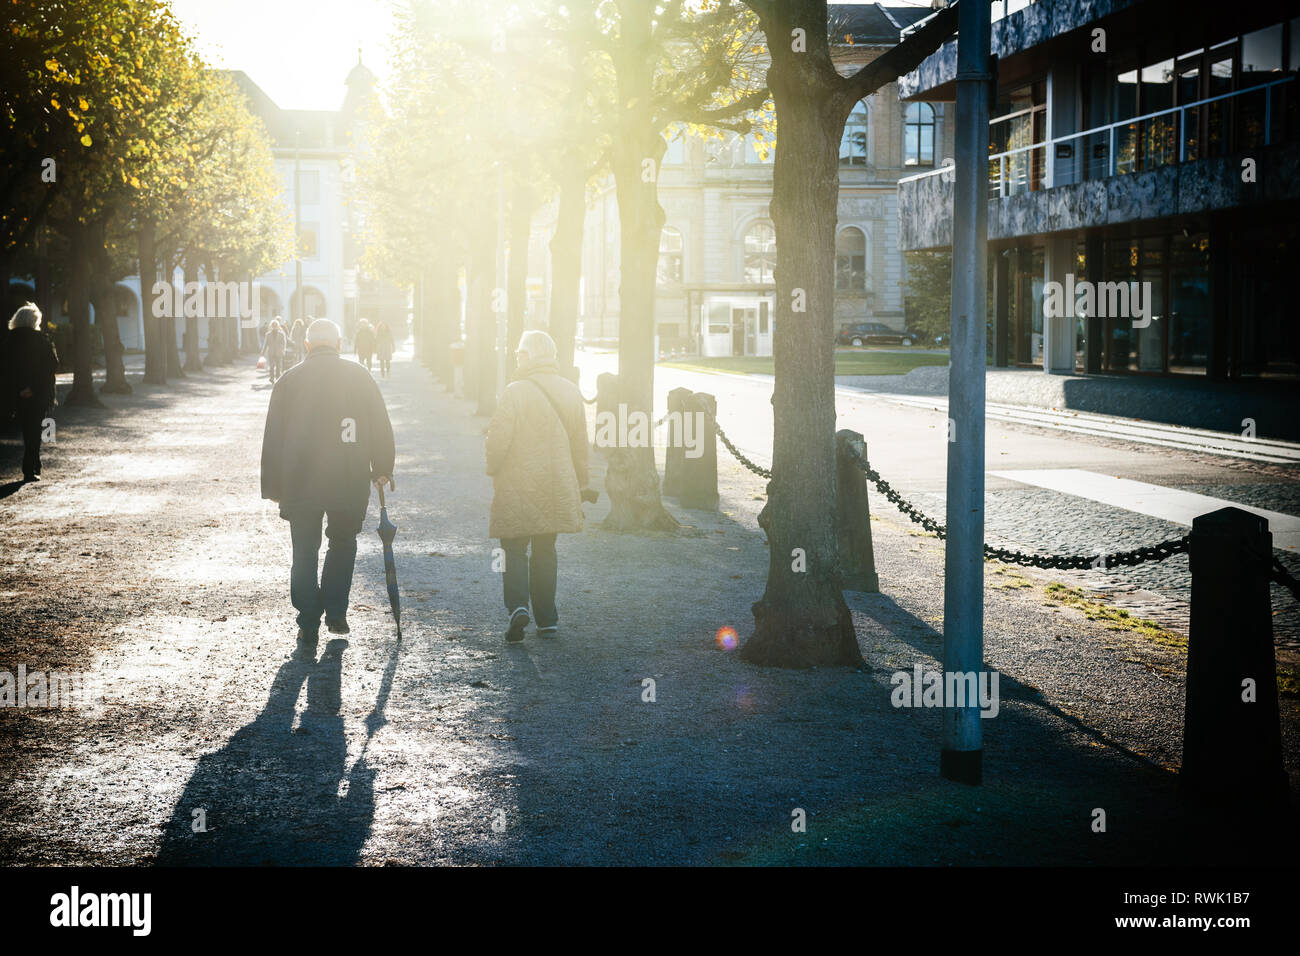 Karlsruhe, Germany - Oct 29 2017: Rear view of adults and seniors walking on alley Schloss Bezirk near Federal Constitutional Court building Bundesverfassungsgericht  Stock Photo